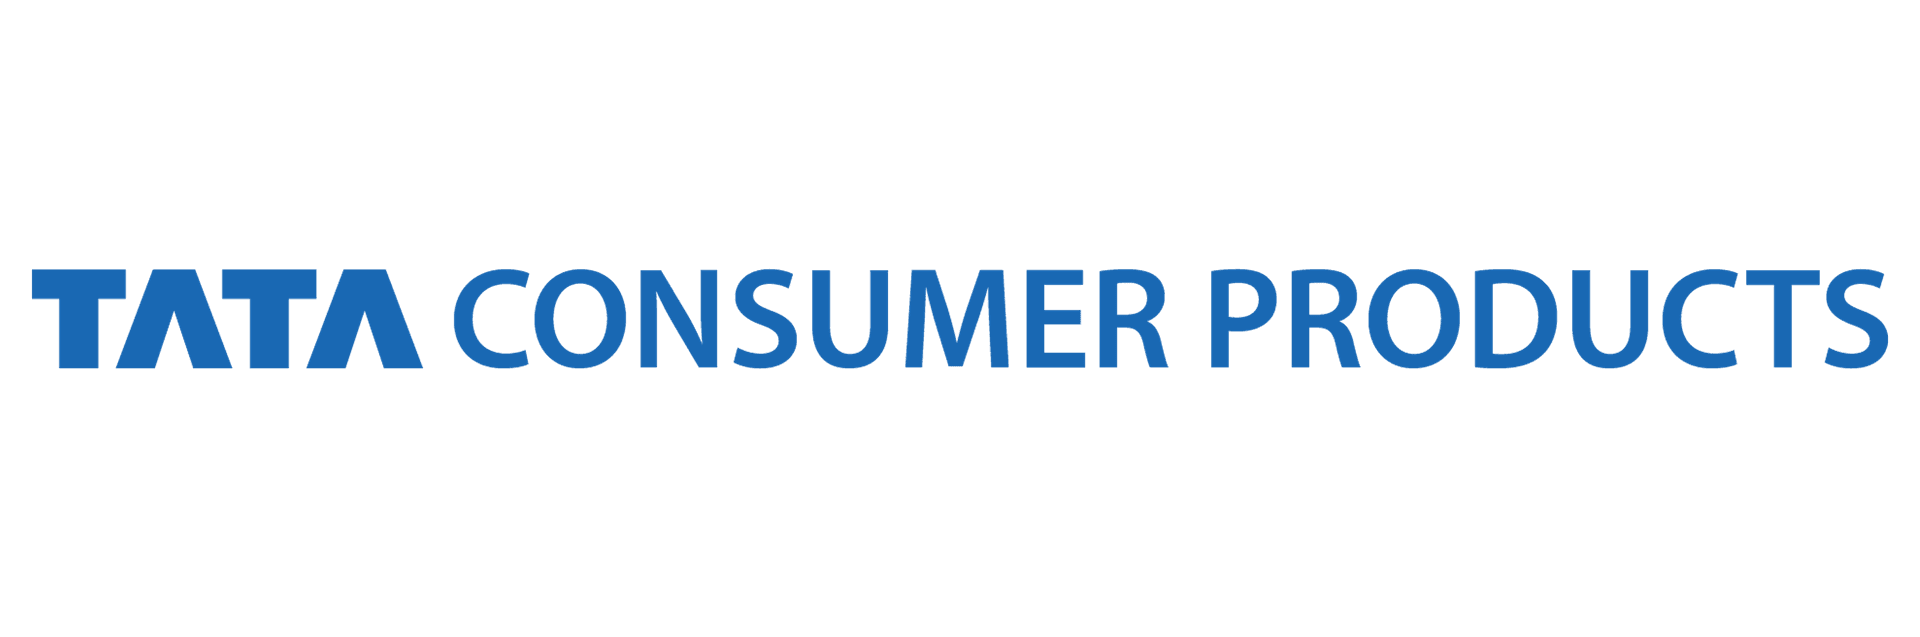 Marketing strategy of tata consumer products - tata consumer products logo